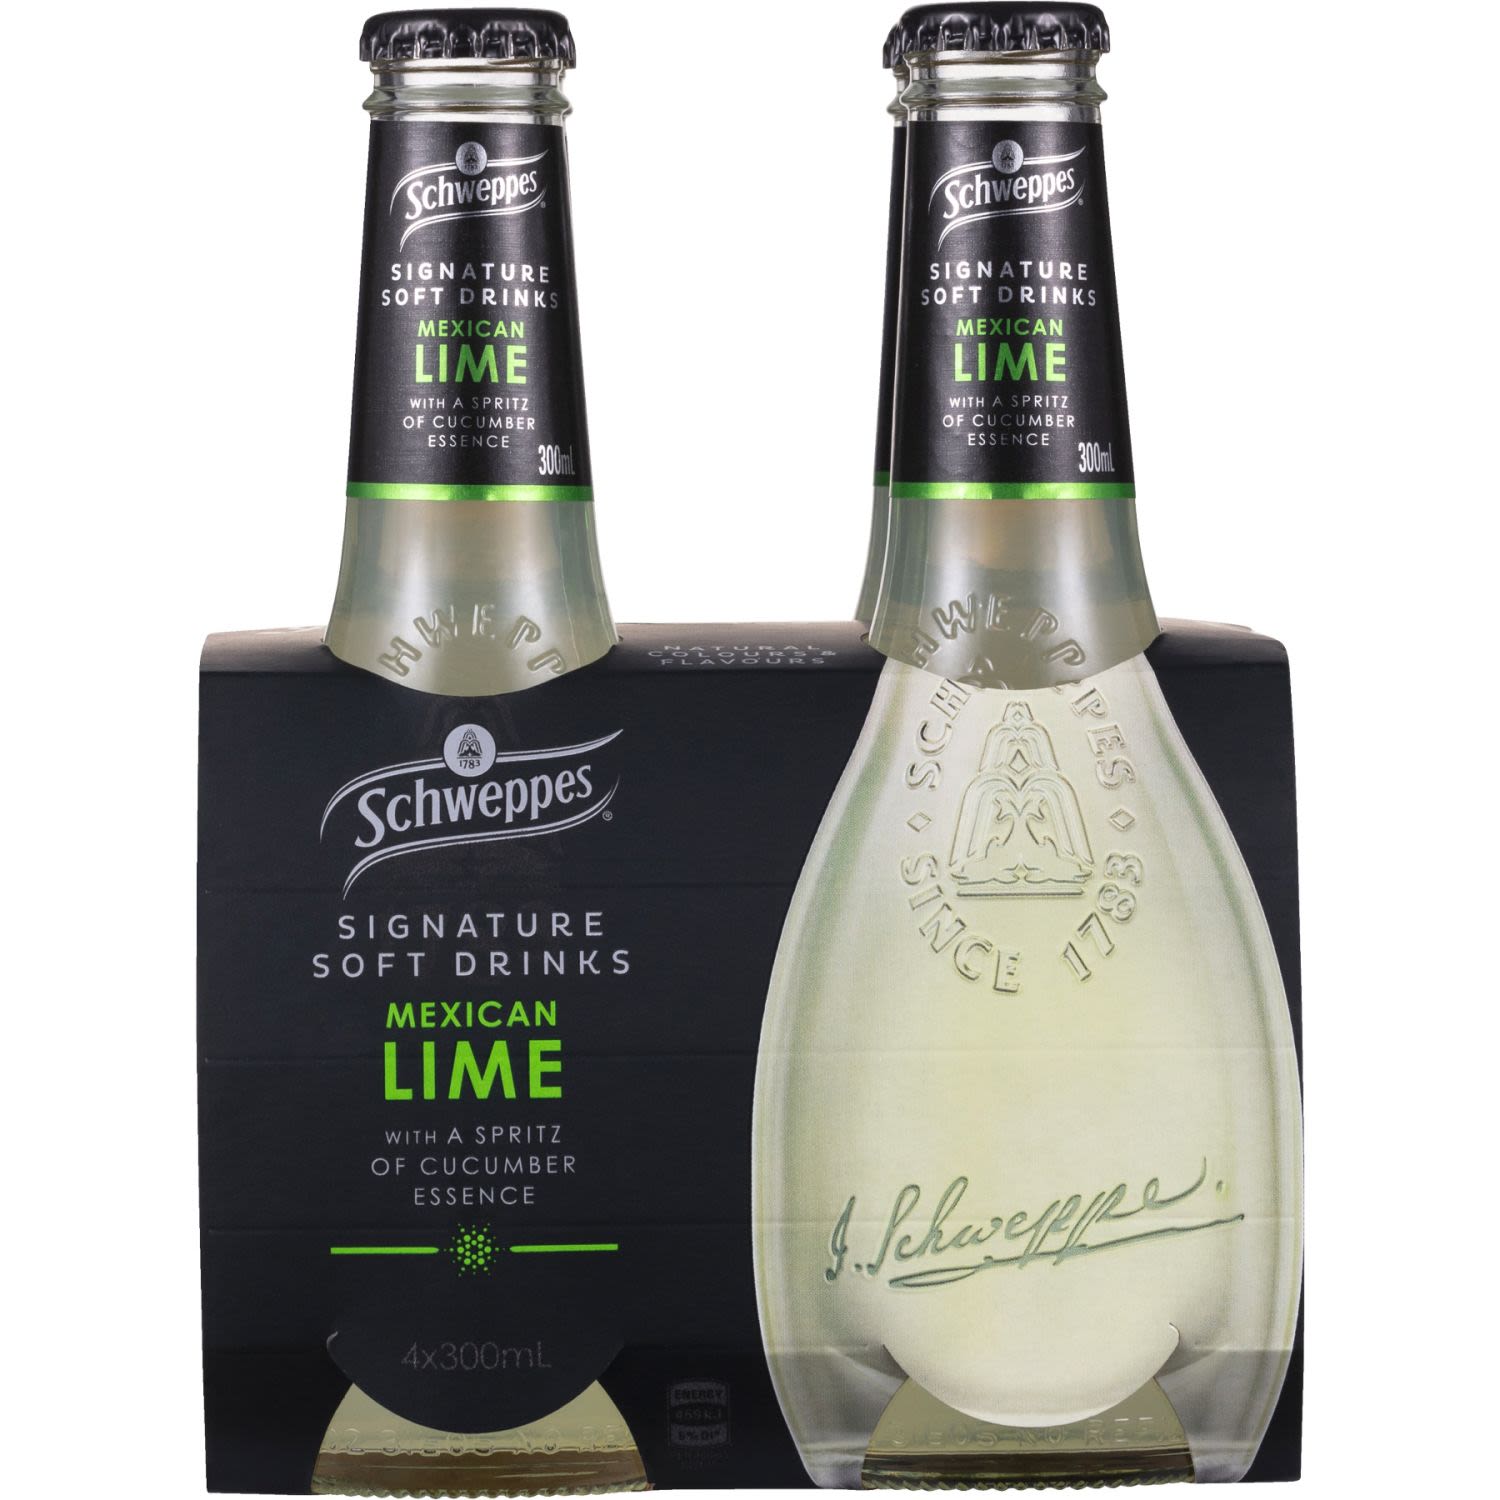 Schweppes Signature Soft Drinks Mexican Lime 300ml, 4 Each